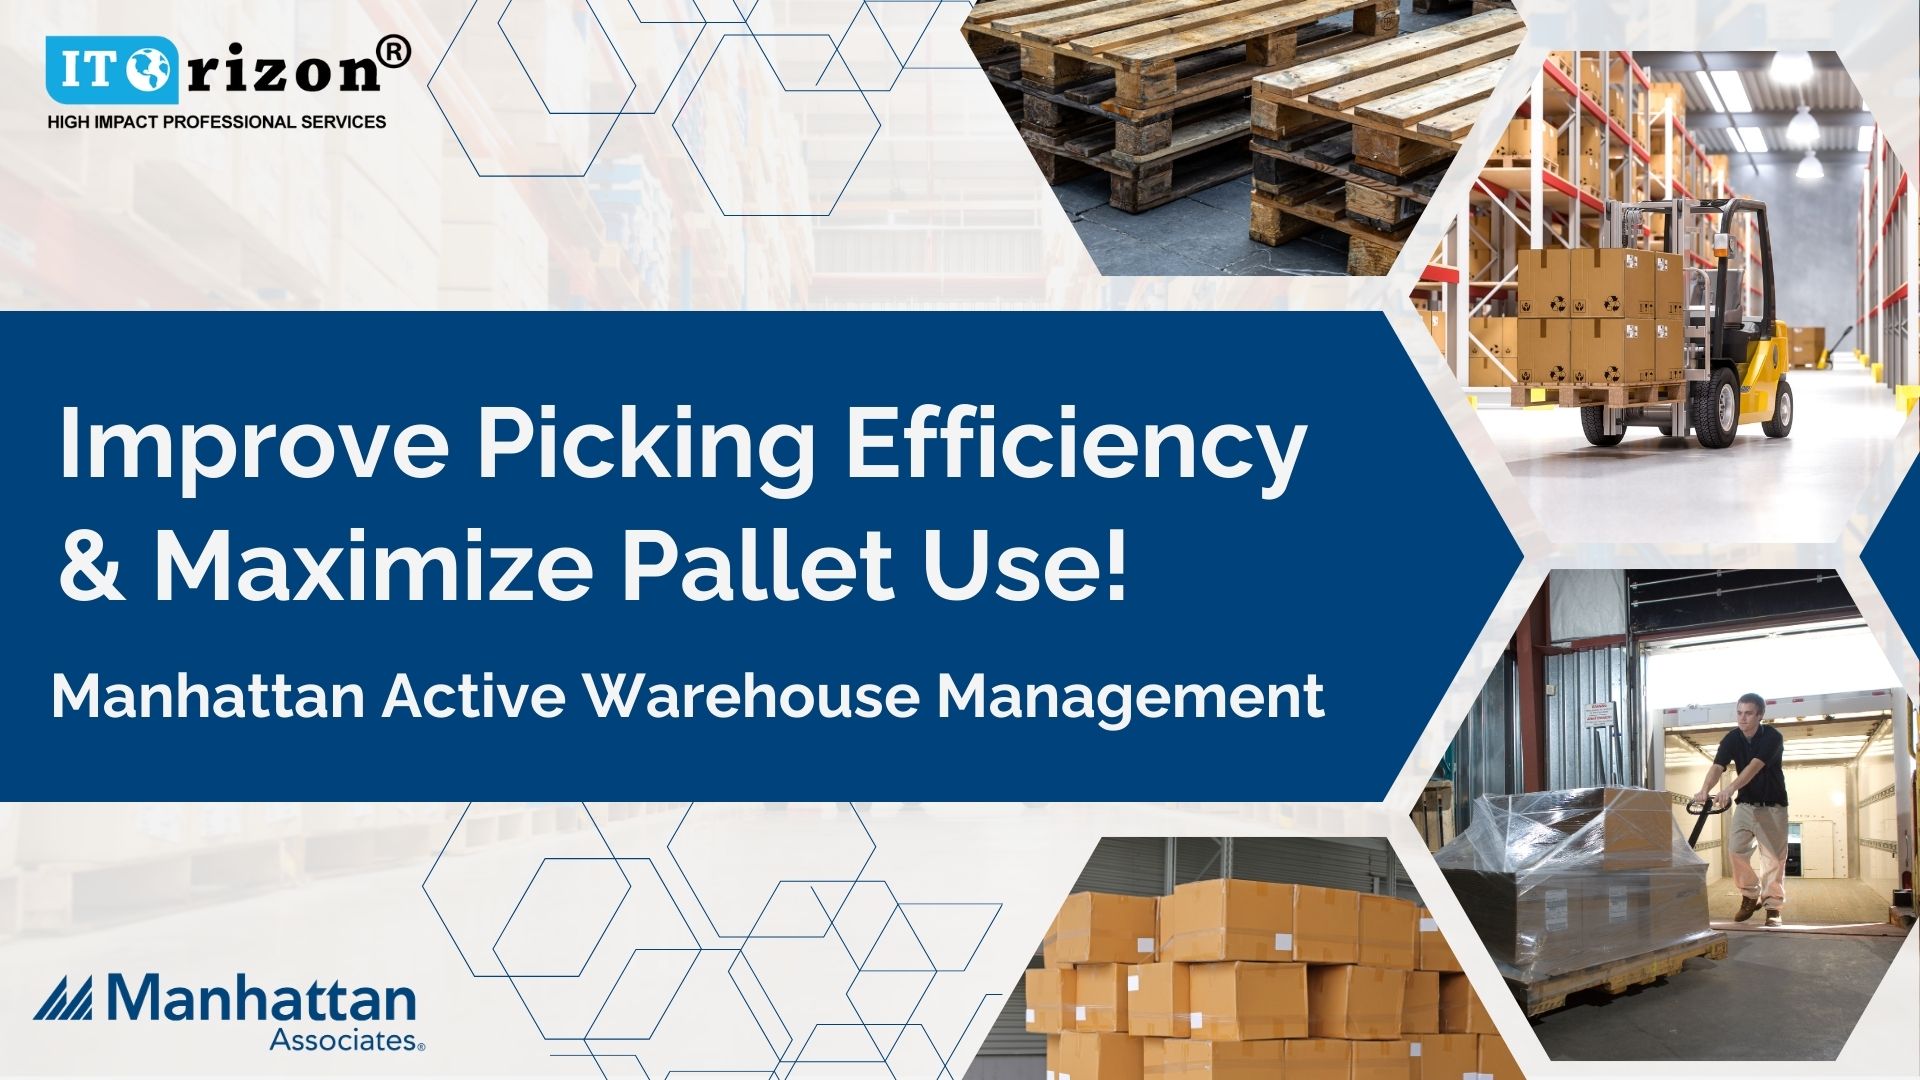 Improve Picking Efficiency & Maximize Pallet Use!